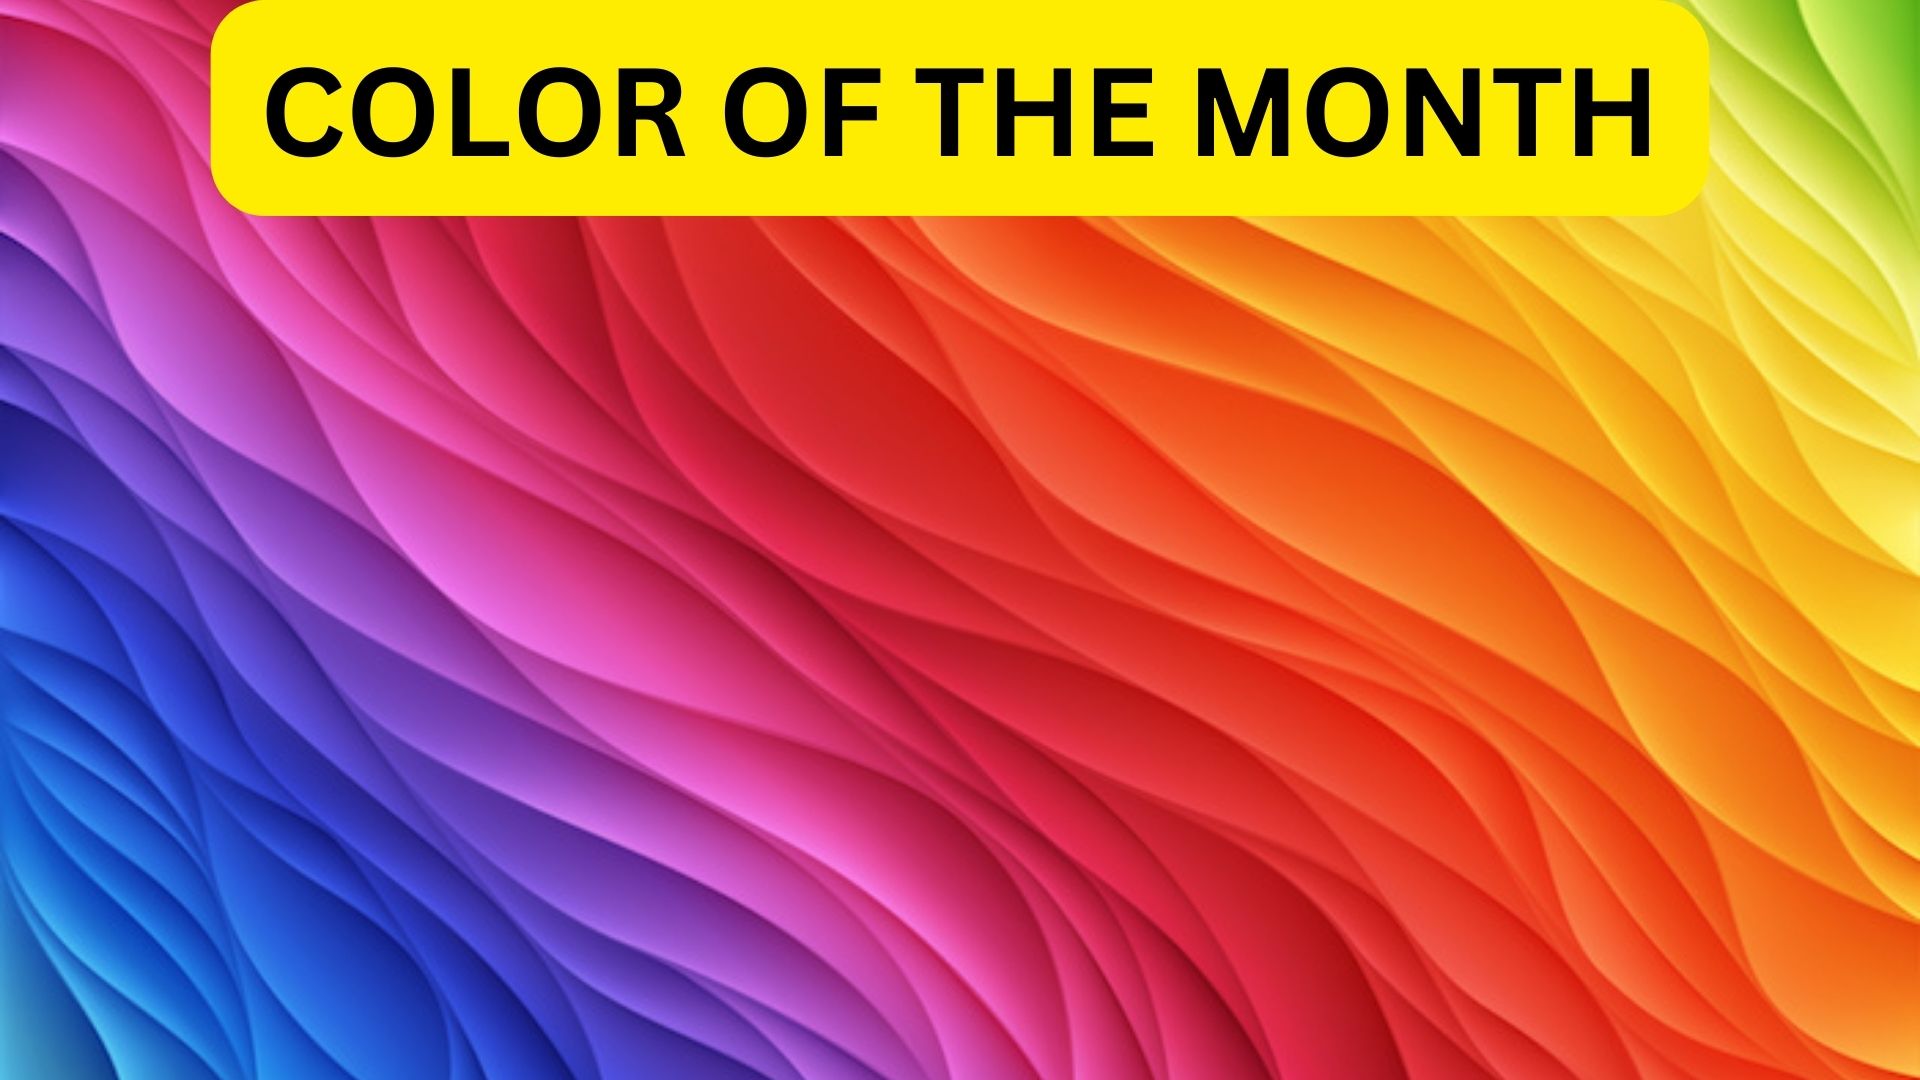 Color Of The Month - What Do They Mean?